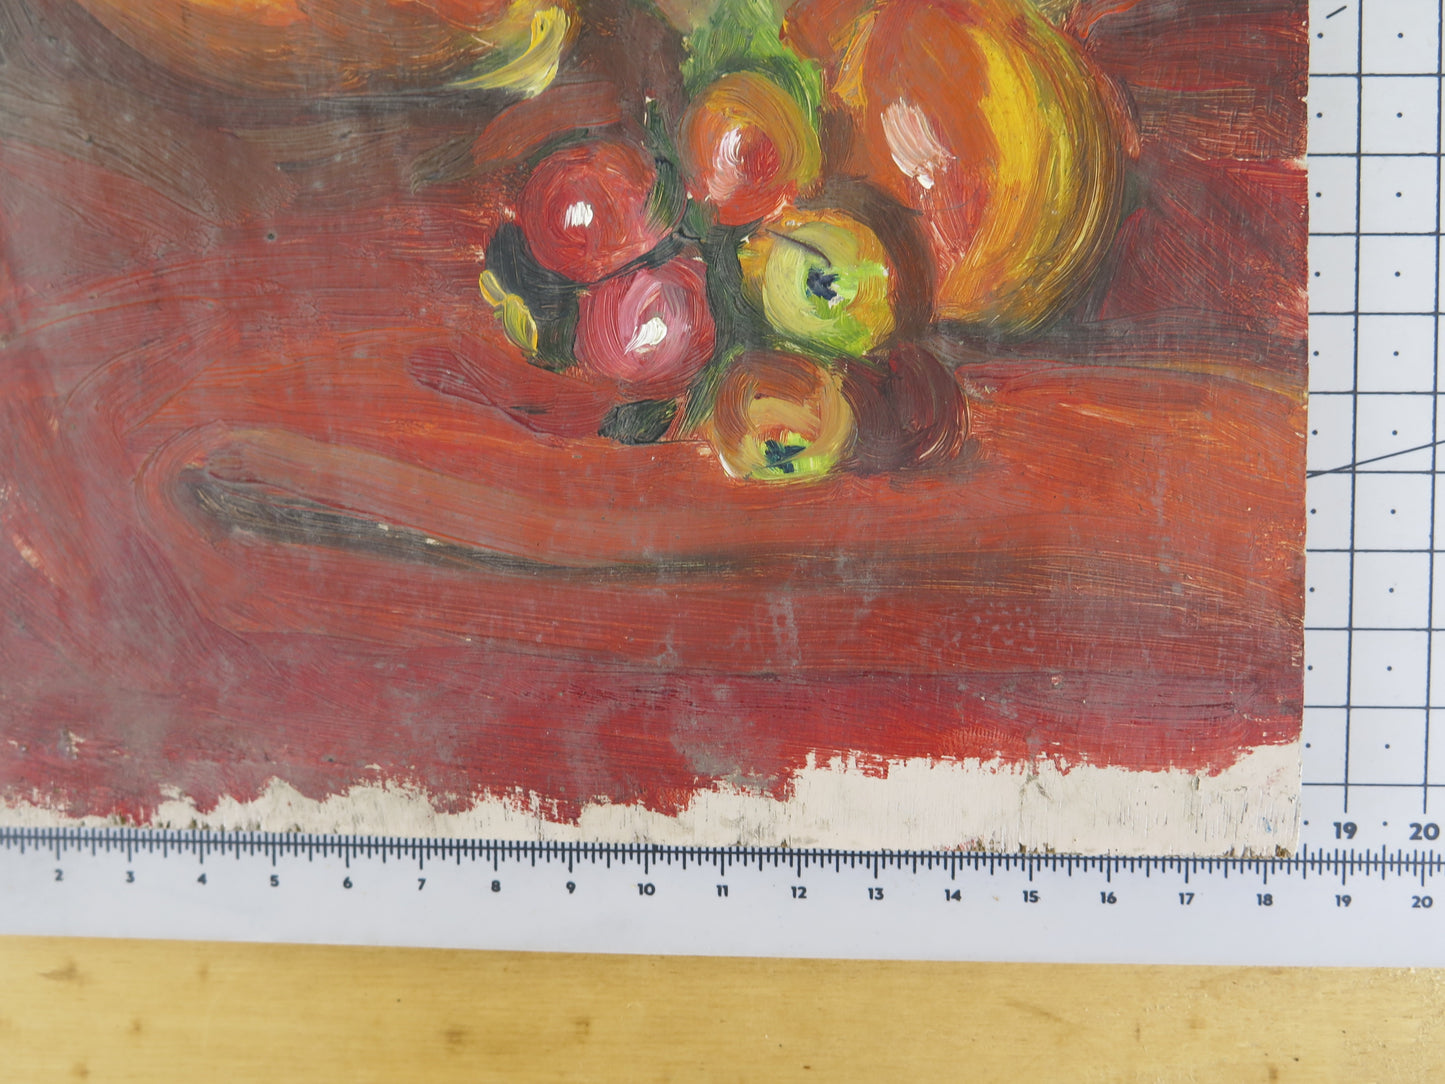 28x22 cm ANTIQUE PAINTING SKETCH OIL PAINTING ON TABLE STILL LIFE FRUIT MD12